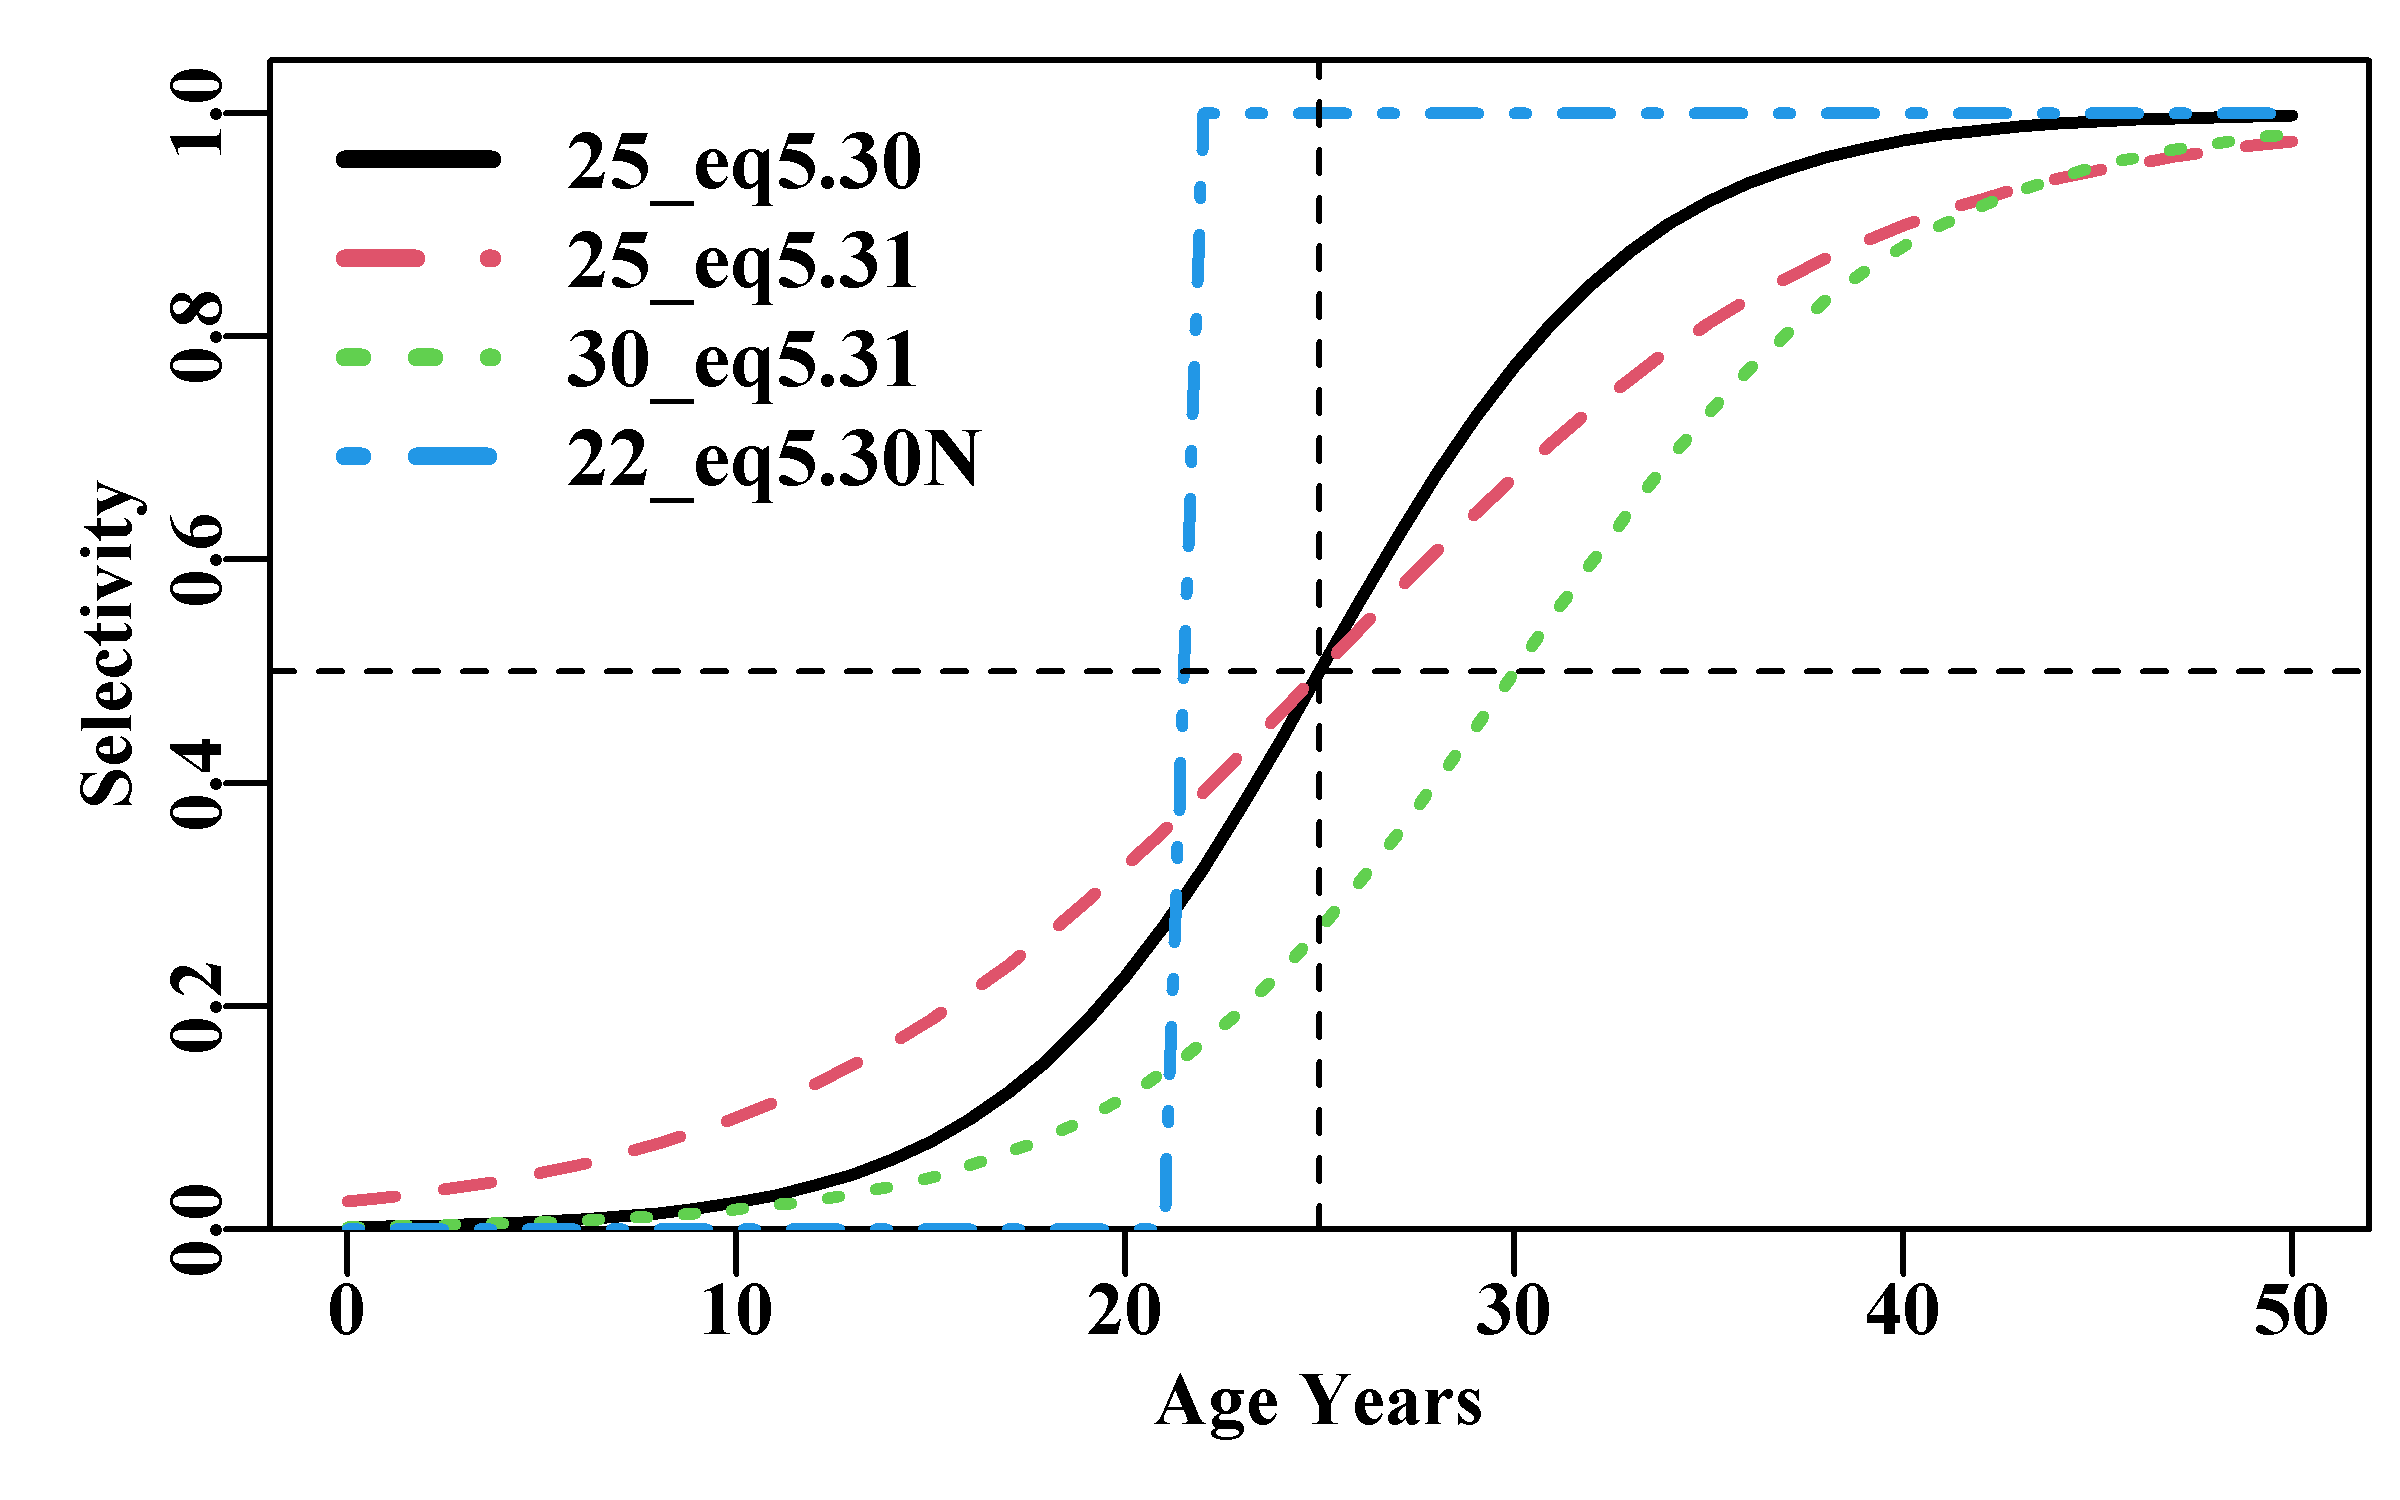 Examples of the logistic S-shaped curve from the logist() and mature() functions. The dashed red and solid black curves have the same L50, though different gradients. The dotted green illustrate the effect of varying the b parameter of the mature() function, while the hashed blue curve illustrates knife-edged selection. The legend depicts the L50 and the equation used.